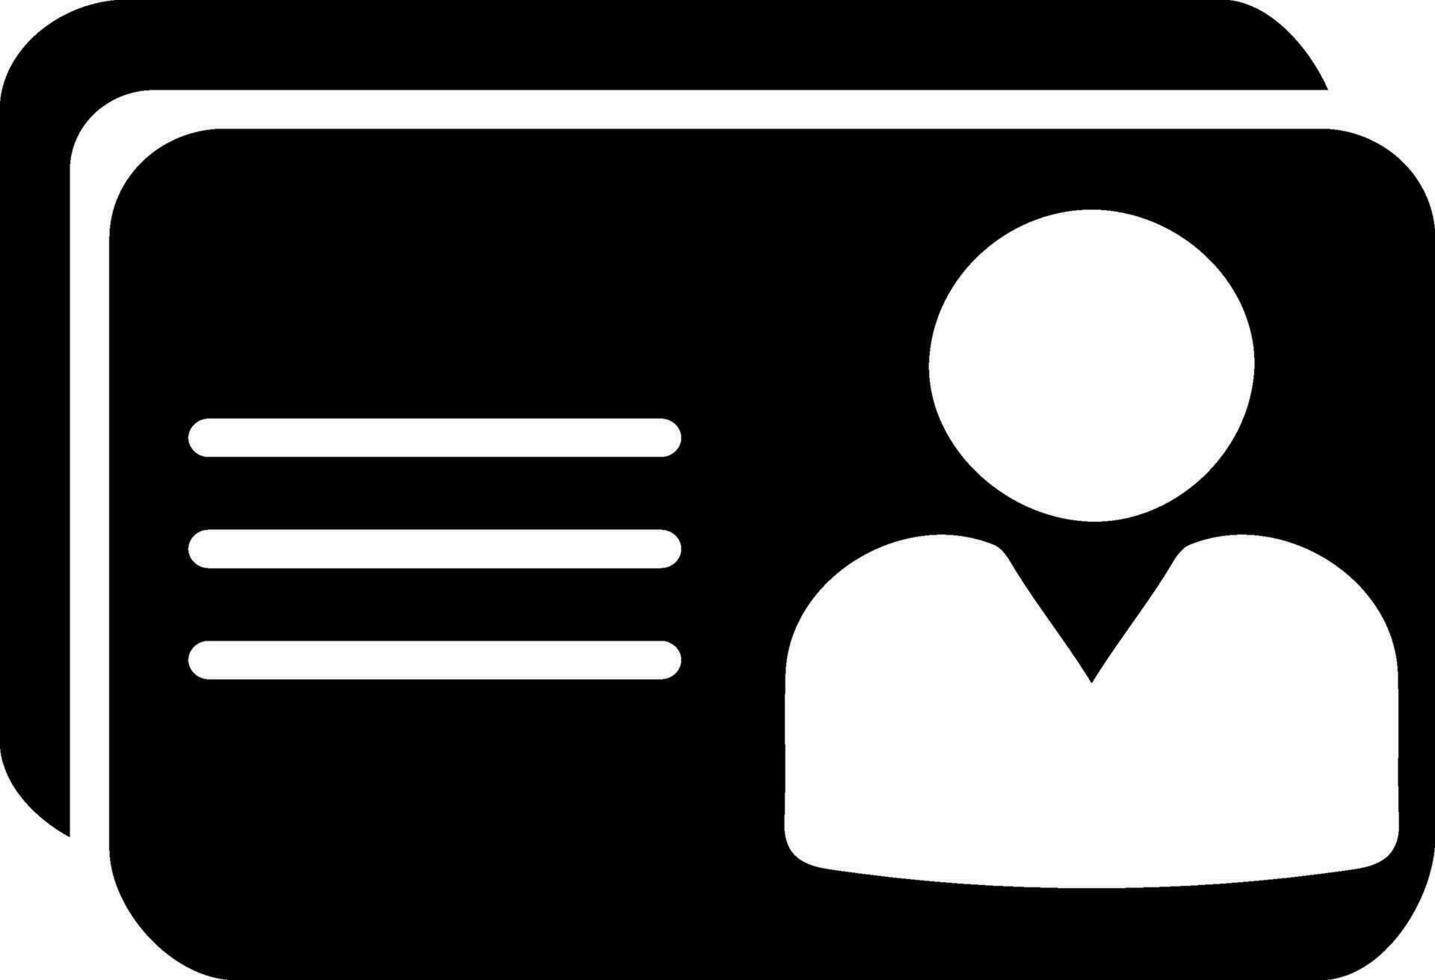 Flat style icon of an identification card. vector